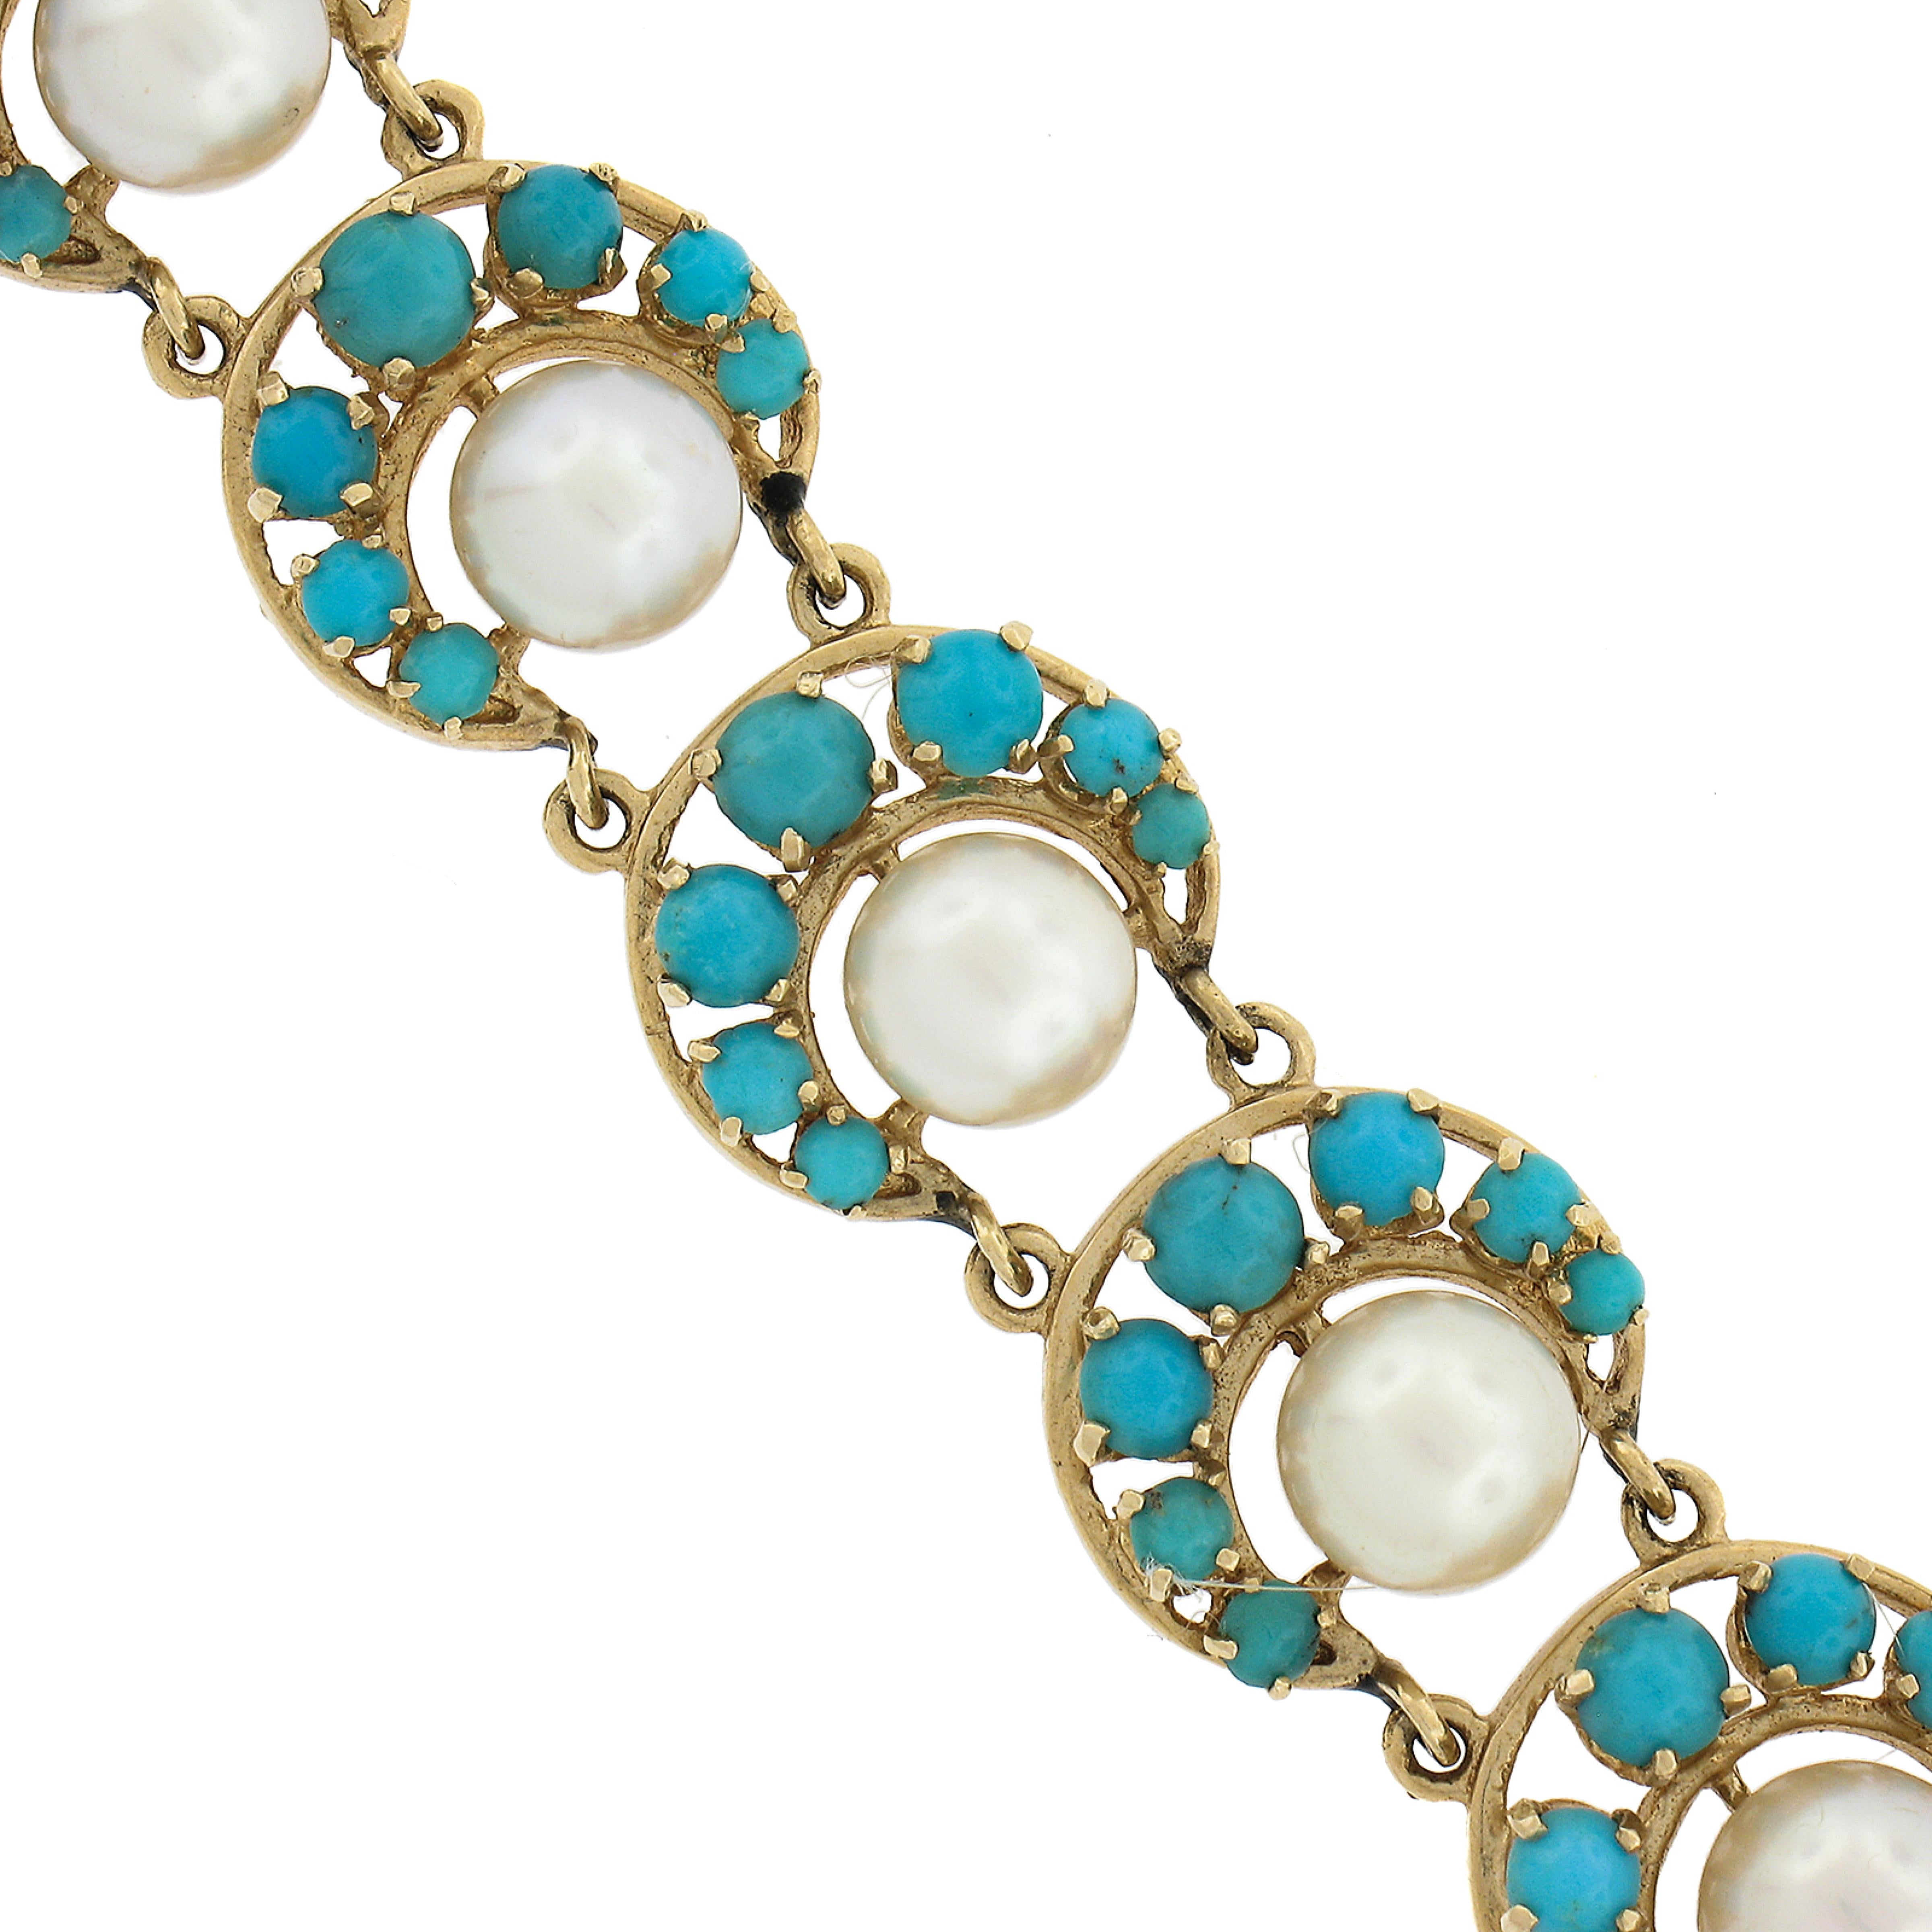 Vintage 14K Yellow Gold Pearls & Turquoise Horseshoe or Crescent Link Bracelet For Sale 1